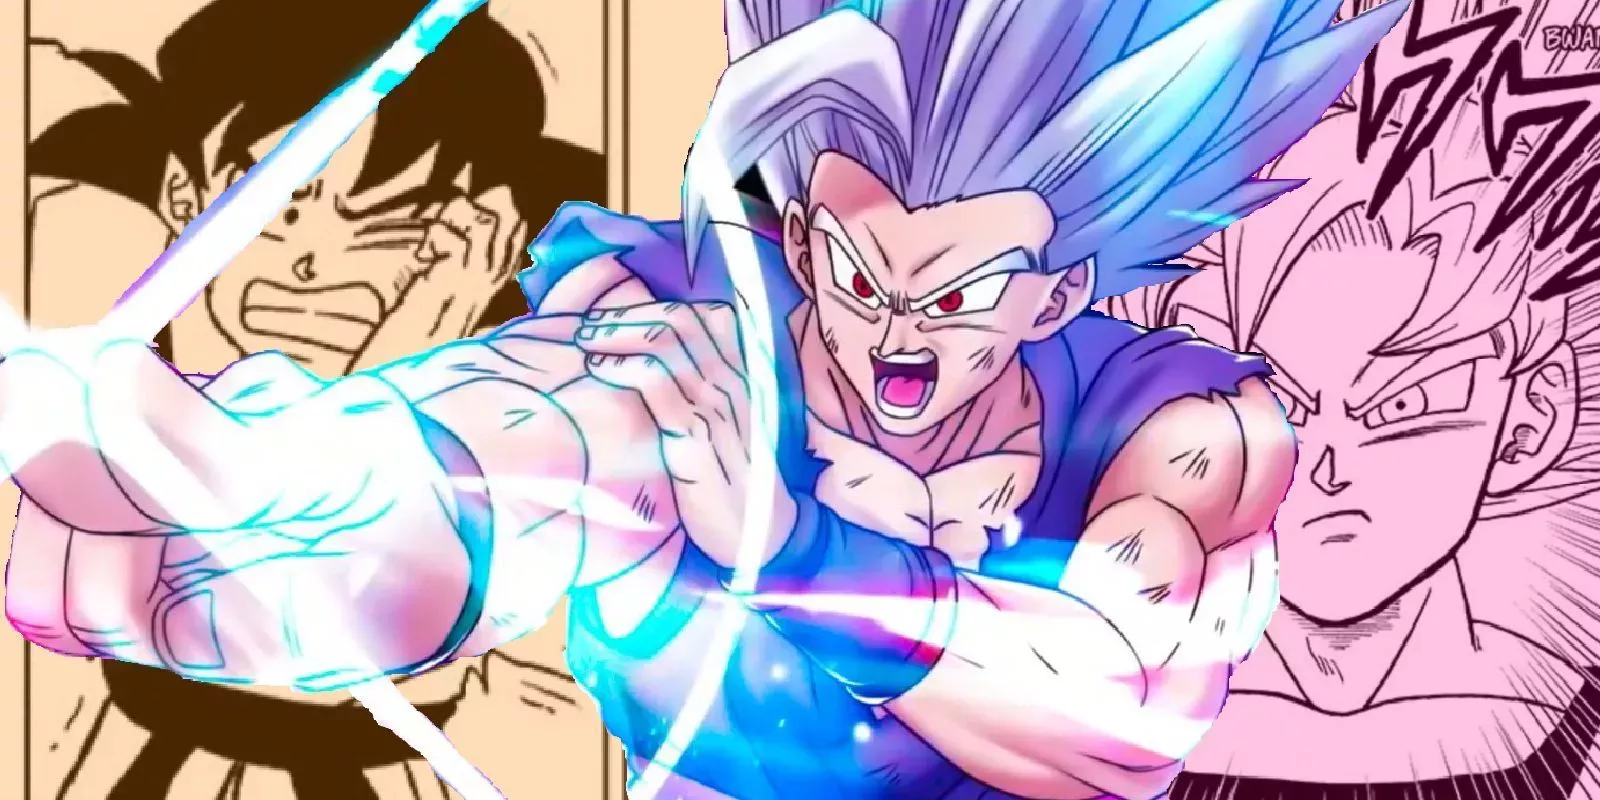 Gohan beast fires a special beam cannon at ultra instinct Goku in Dragon Ball Super